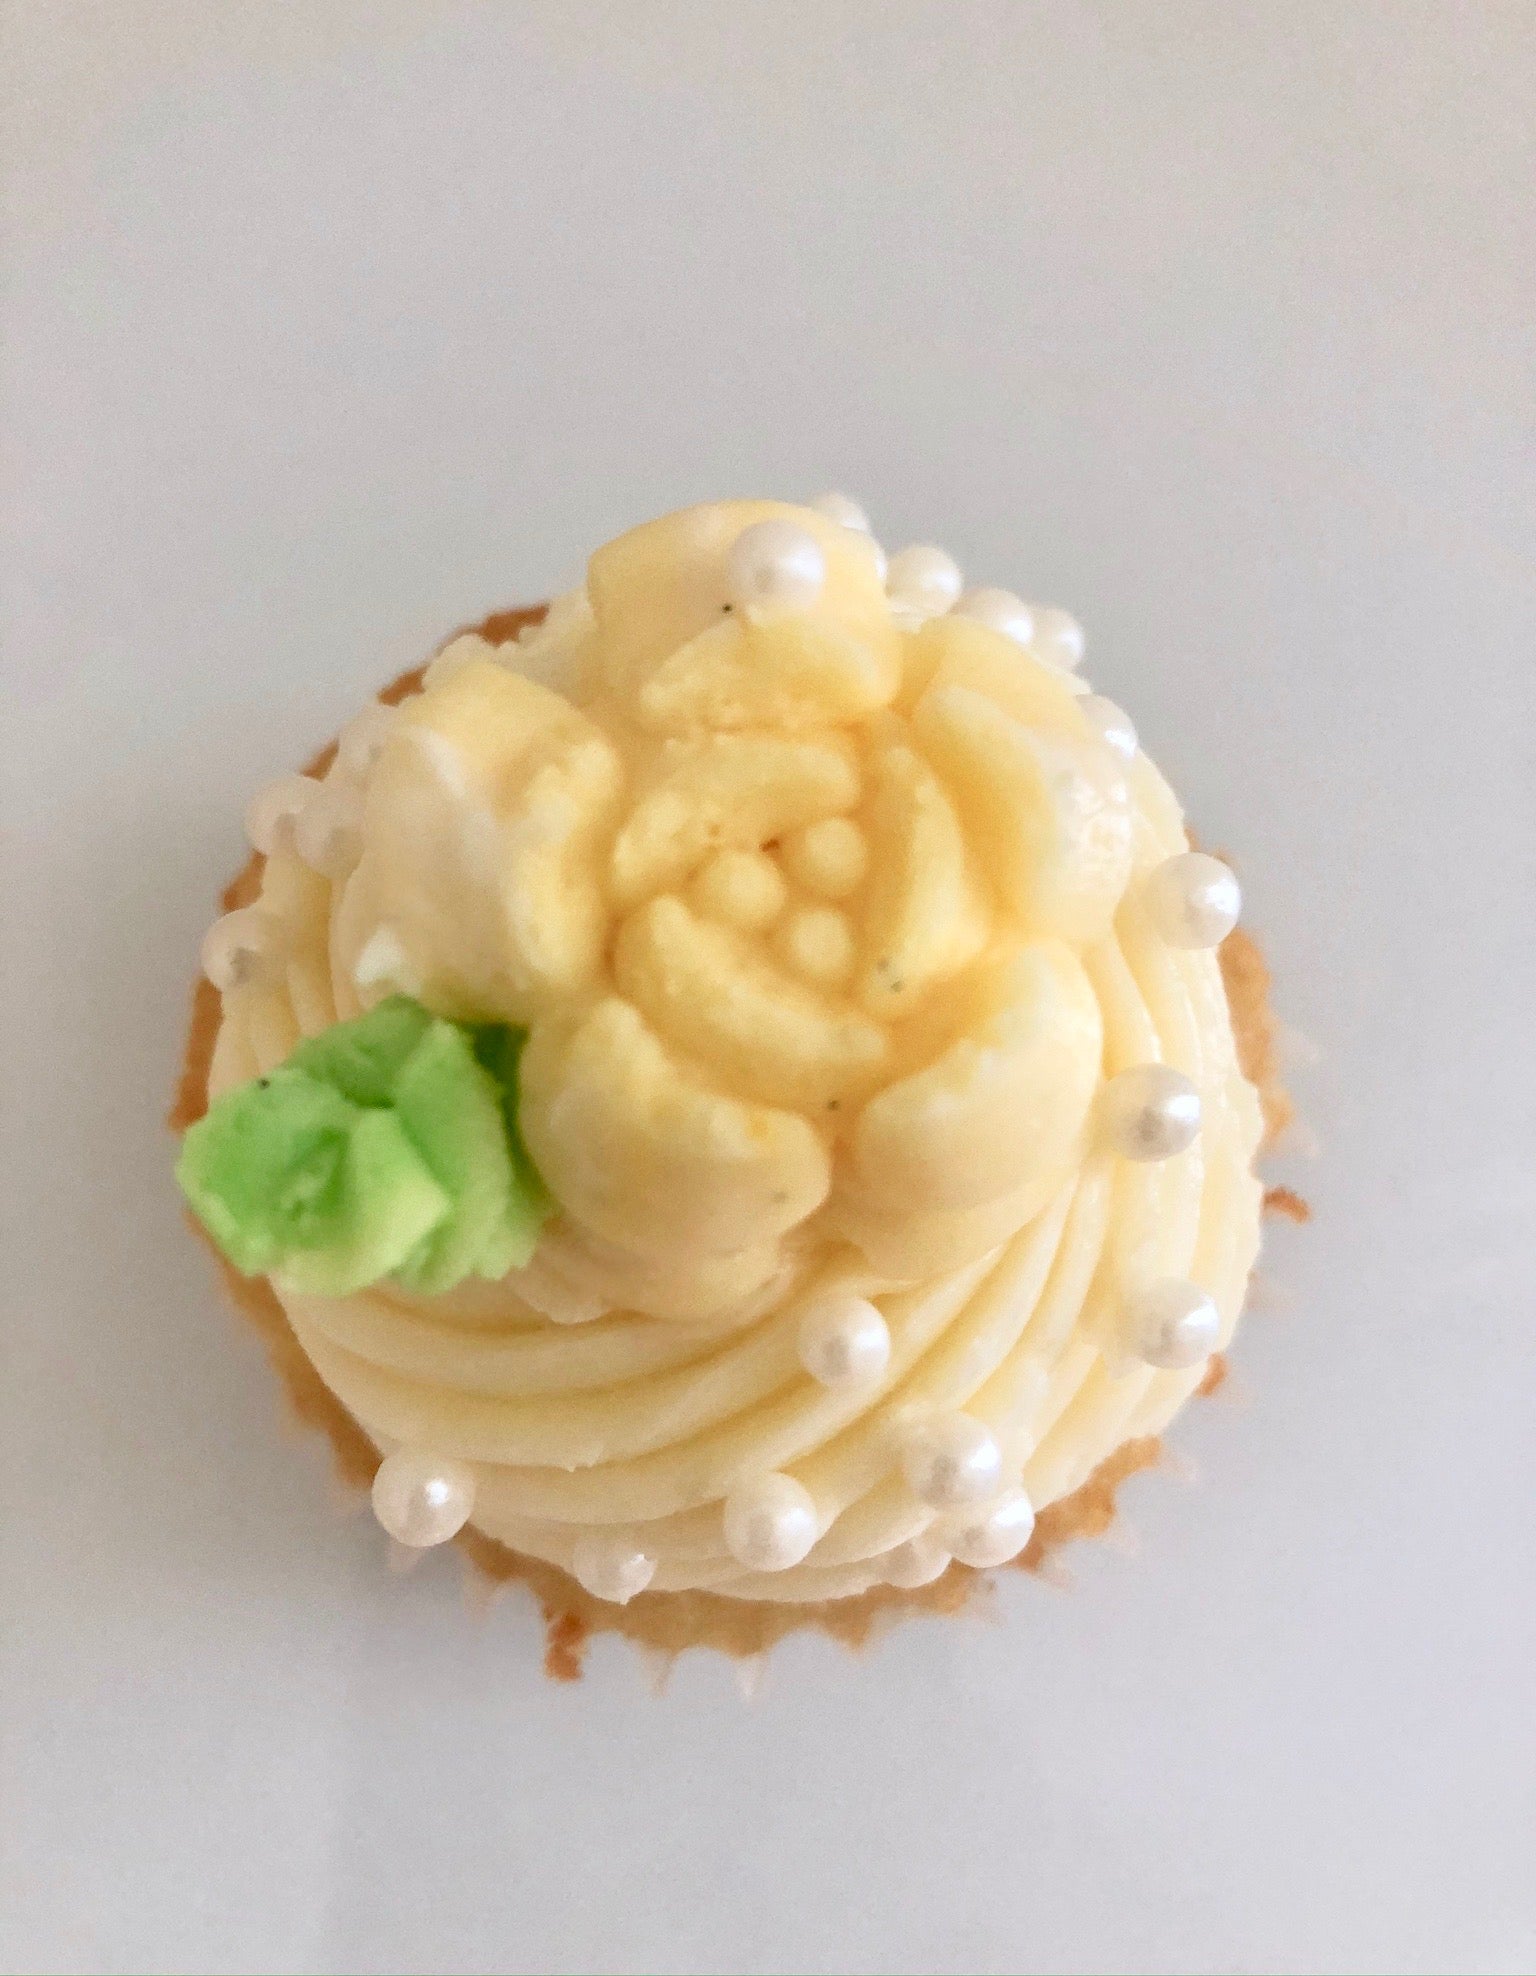 Just Married Almond - Mcks' Cupcakes in South Florida